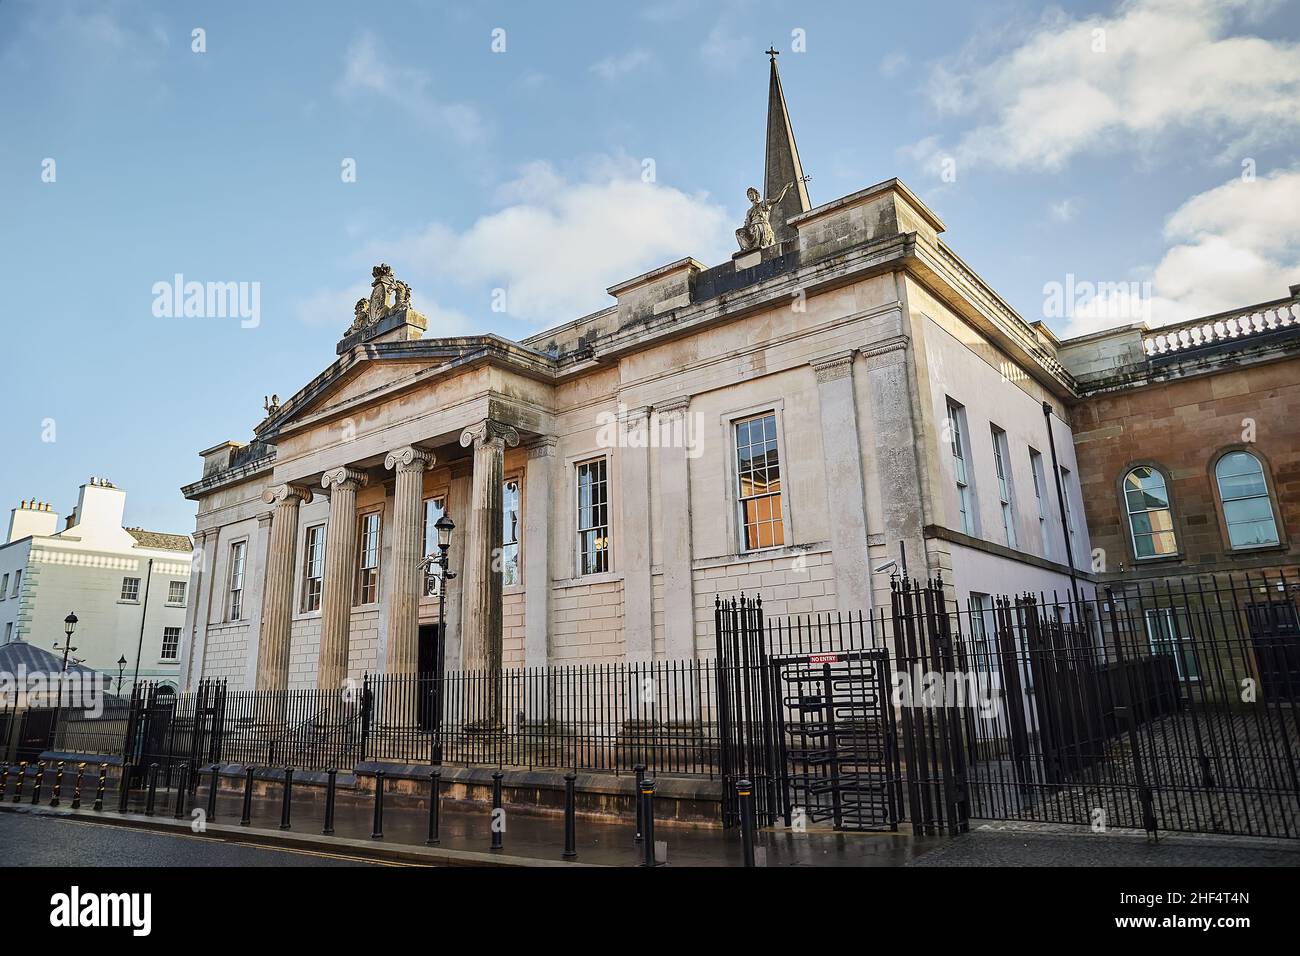 Derry, Londonderry. The white sandstone Bishop Street Courthouse in Derry Stock Photo